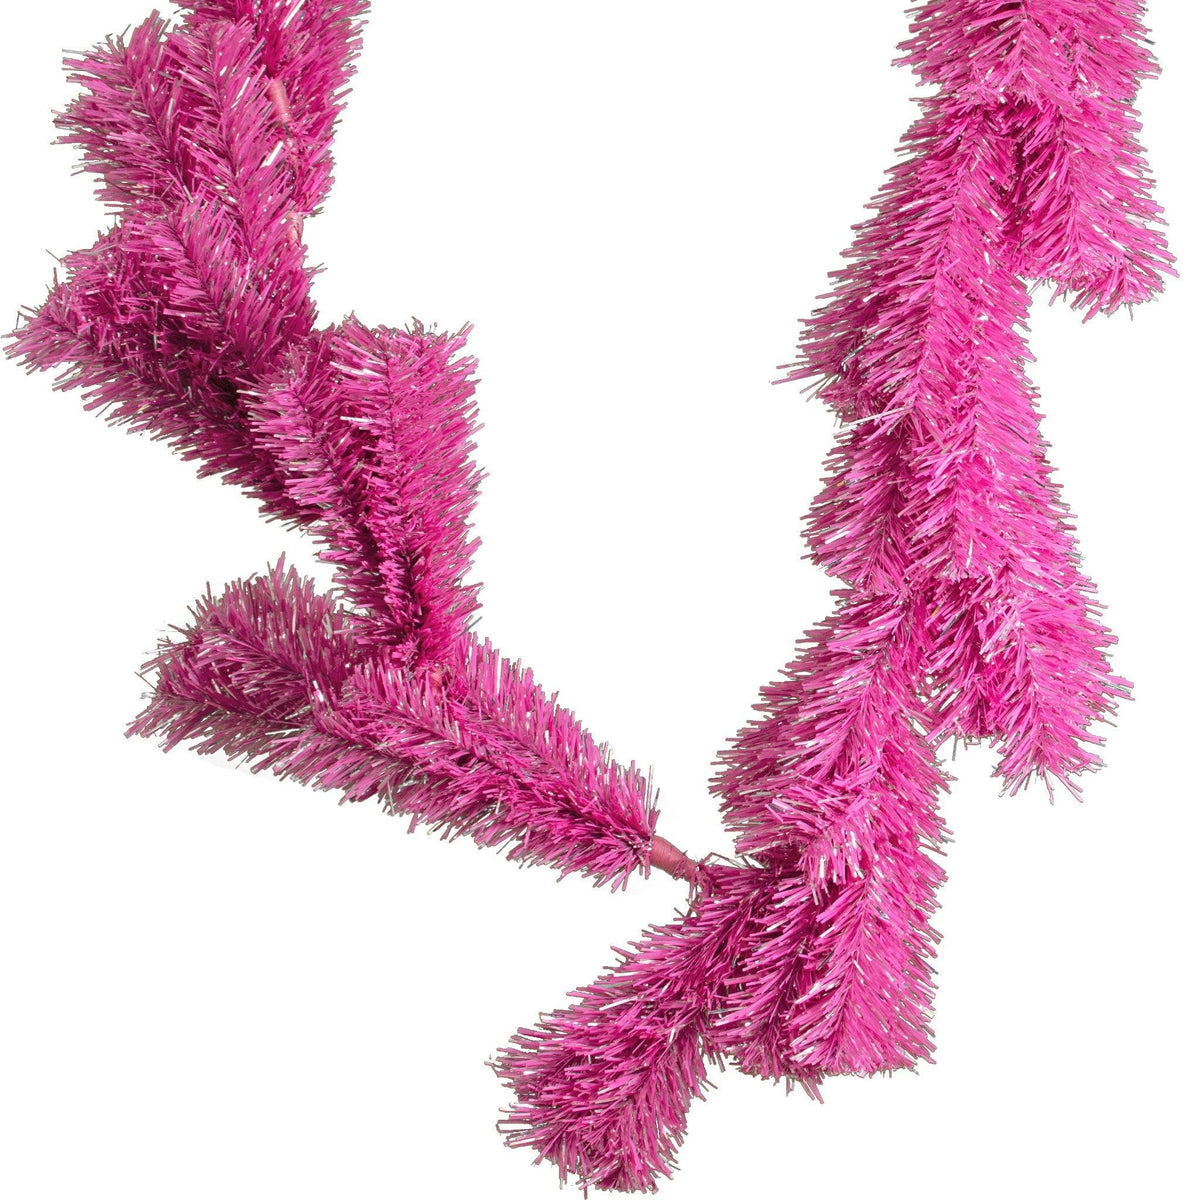   Shop for Lee Display's brand new 6FT Pink and Silver Tinsel Brush Garlands on sale now at leedisplay.com.  Garland branches can be bent into any direction.  Customer needs to shape the garland when it arrives.